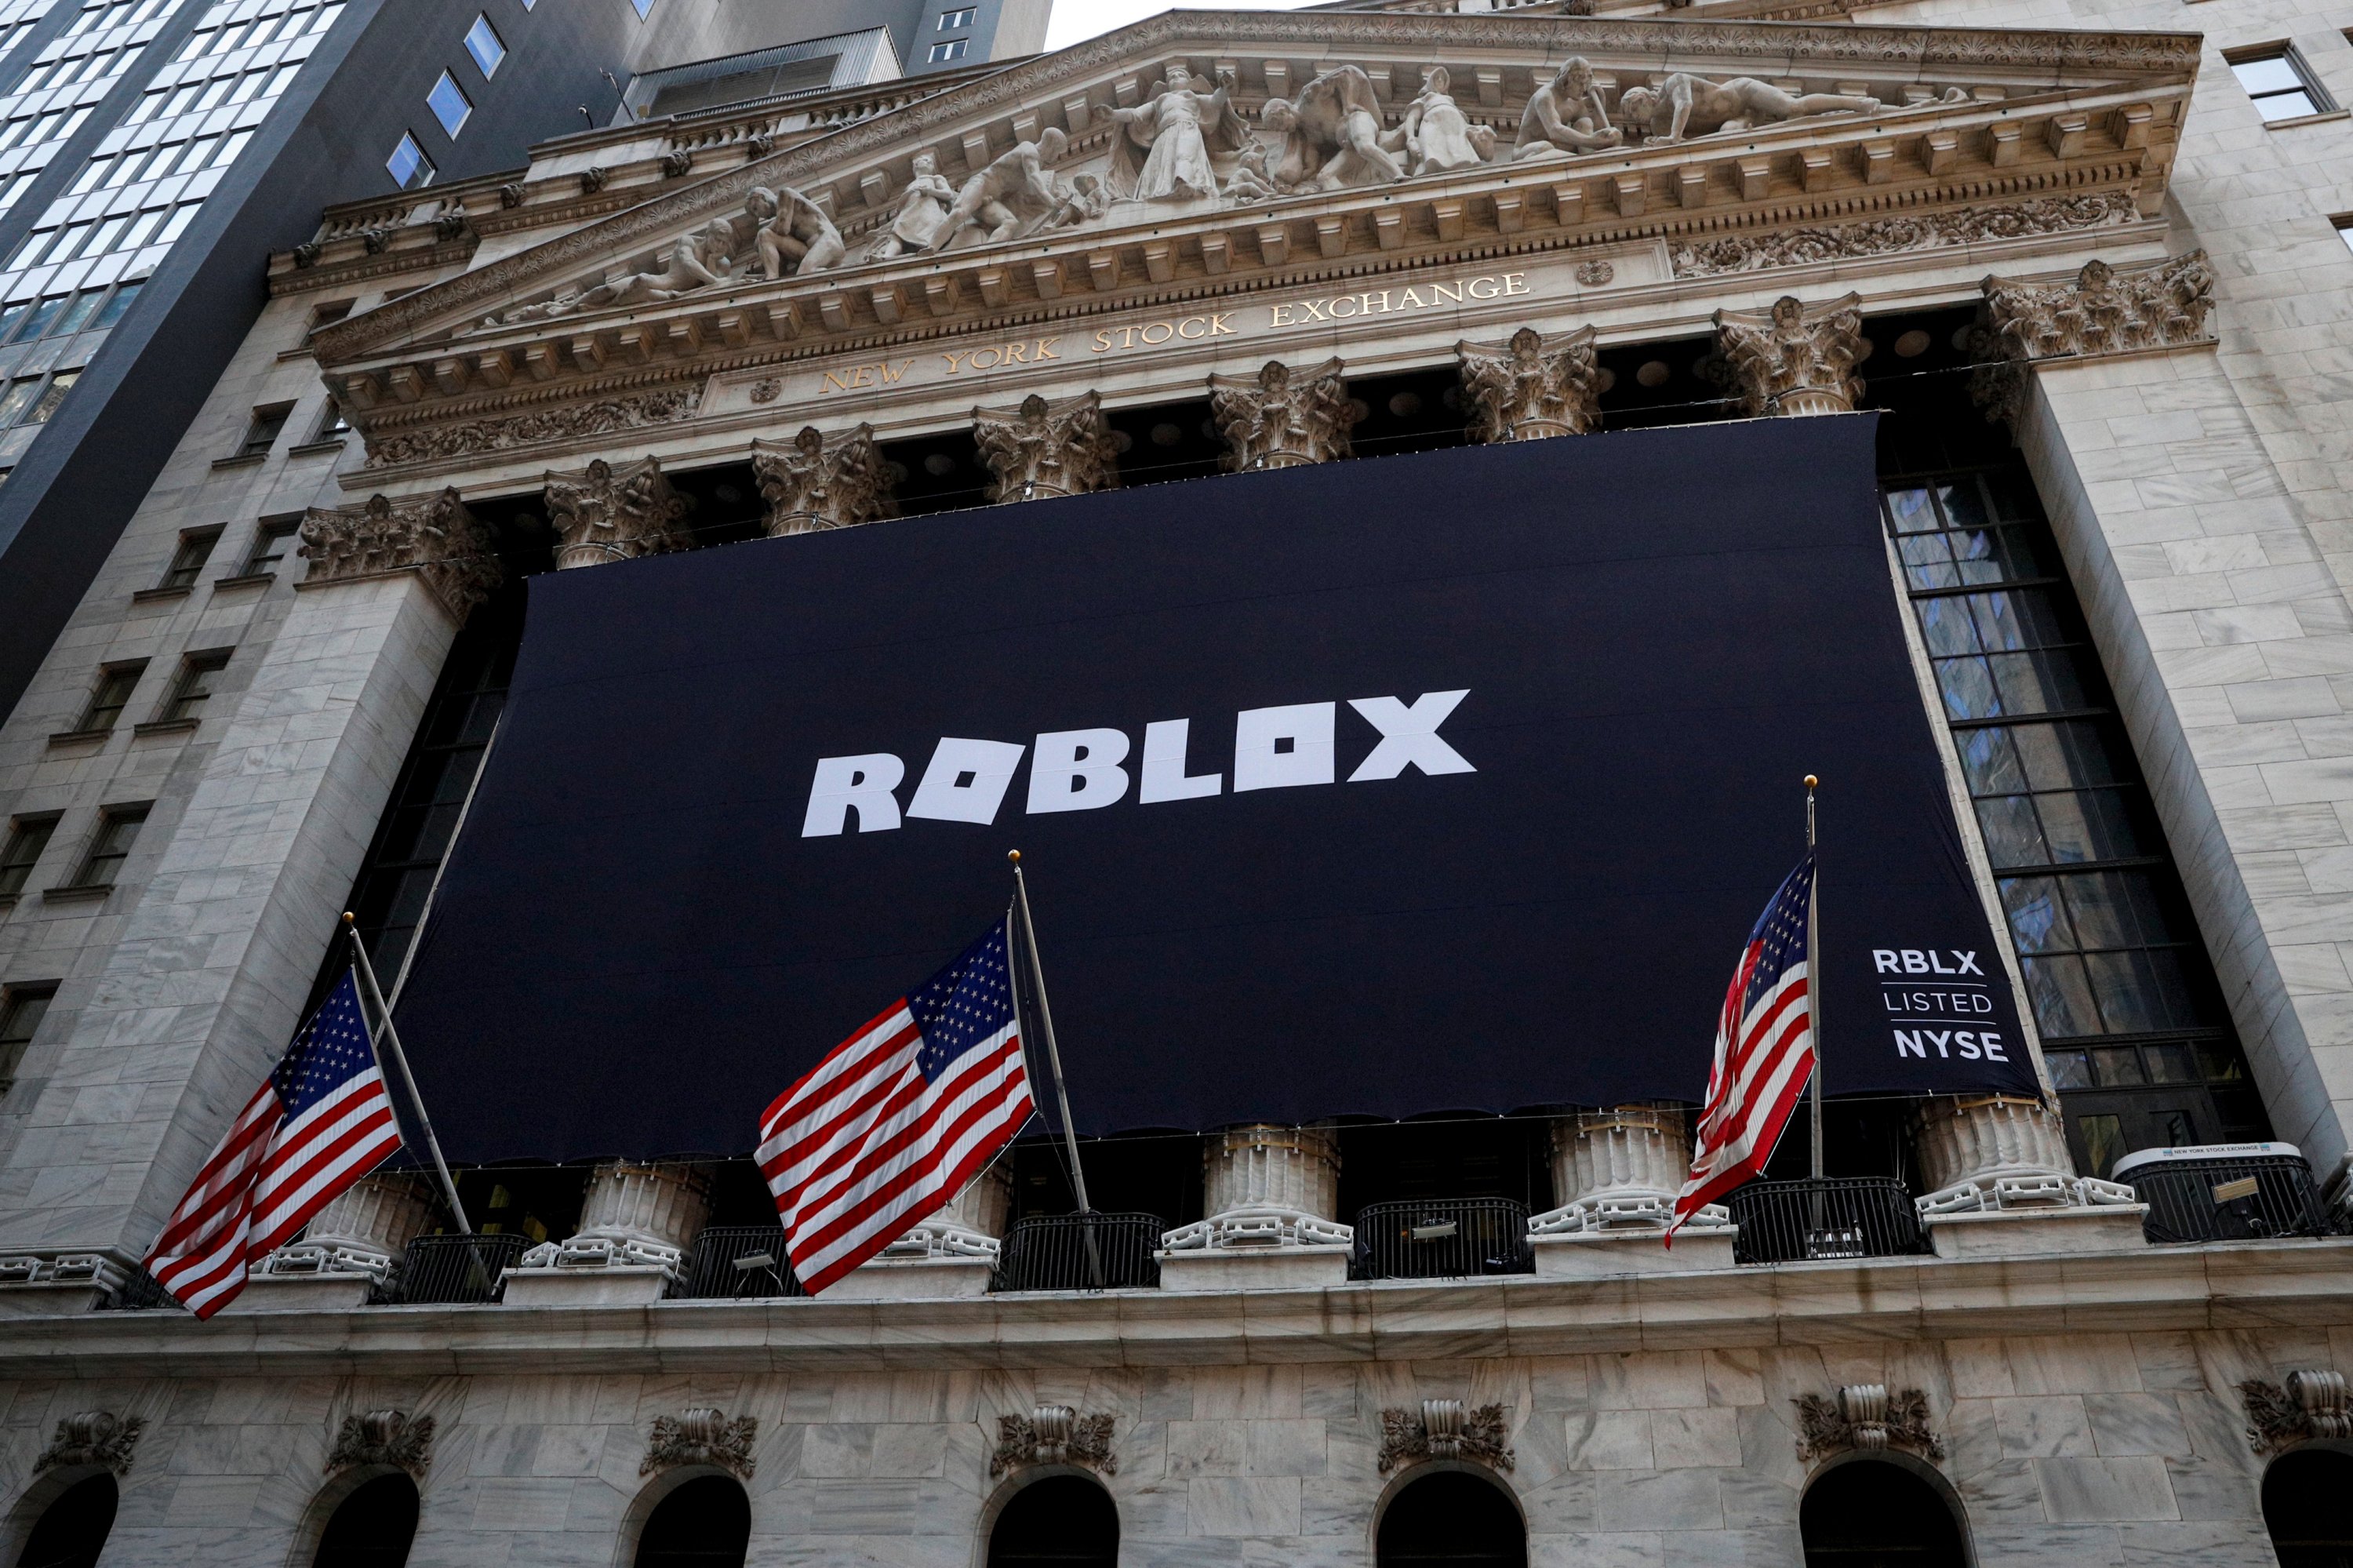 The Roblox logo is displayed on a banner, to celebrate the company's IPO, on the front facade of the New York Stock Exchange (NYSE) in New York, U.S., March 10, 2021. (Reuters Photo)